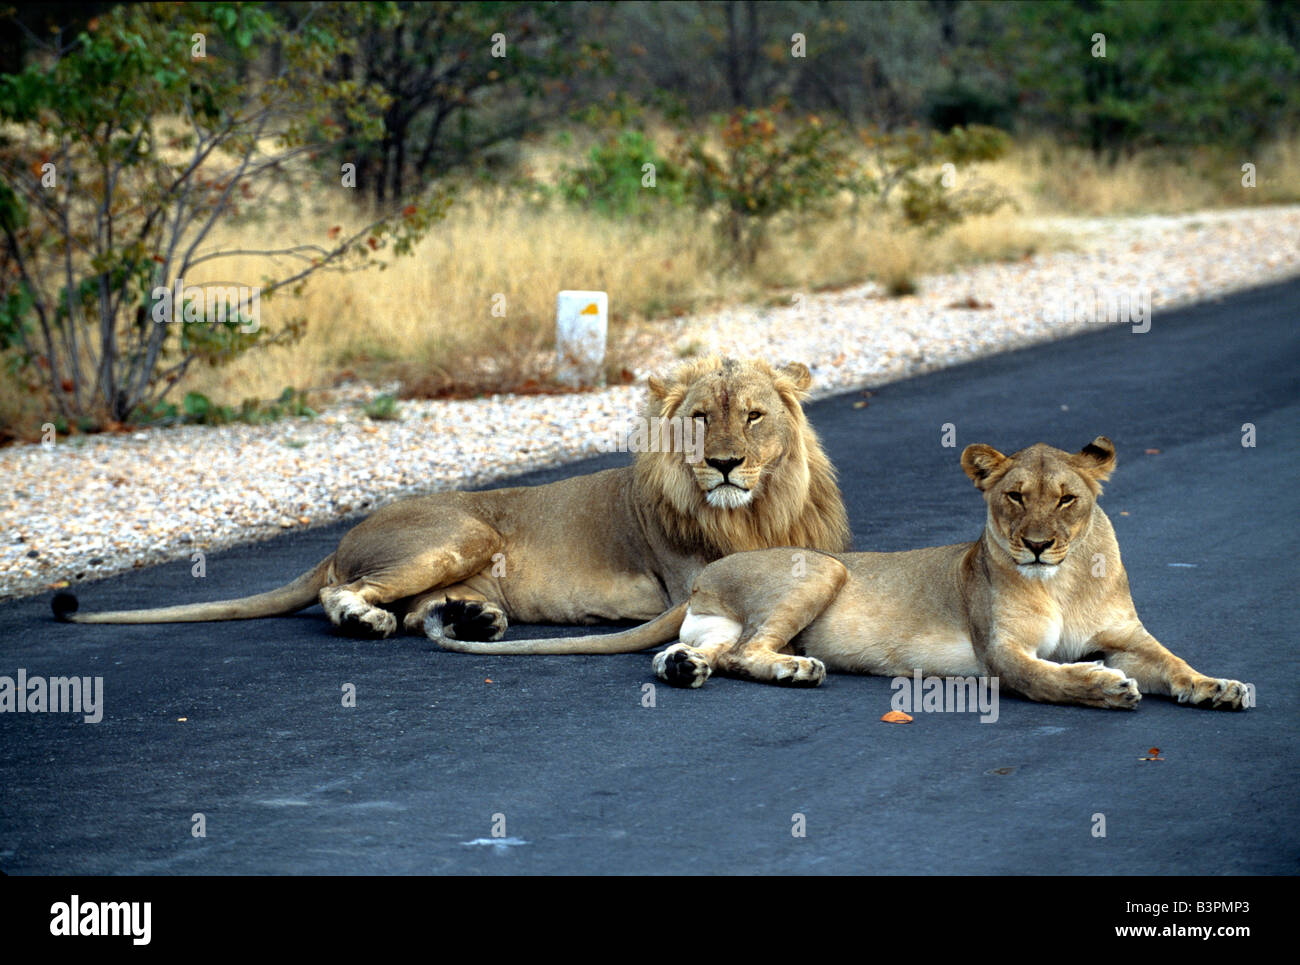 Lions (Panthera leo) laying in the middle of a road in Etosha National Park, Namibia, Africa Stock Photo